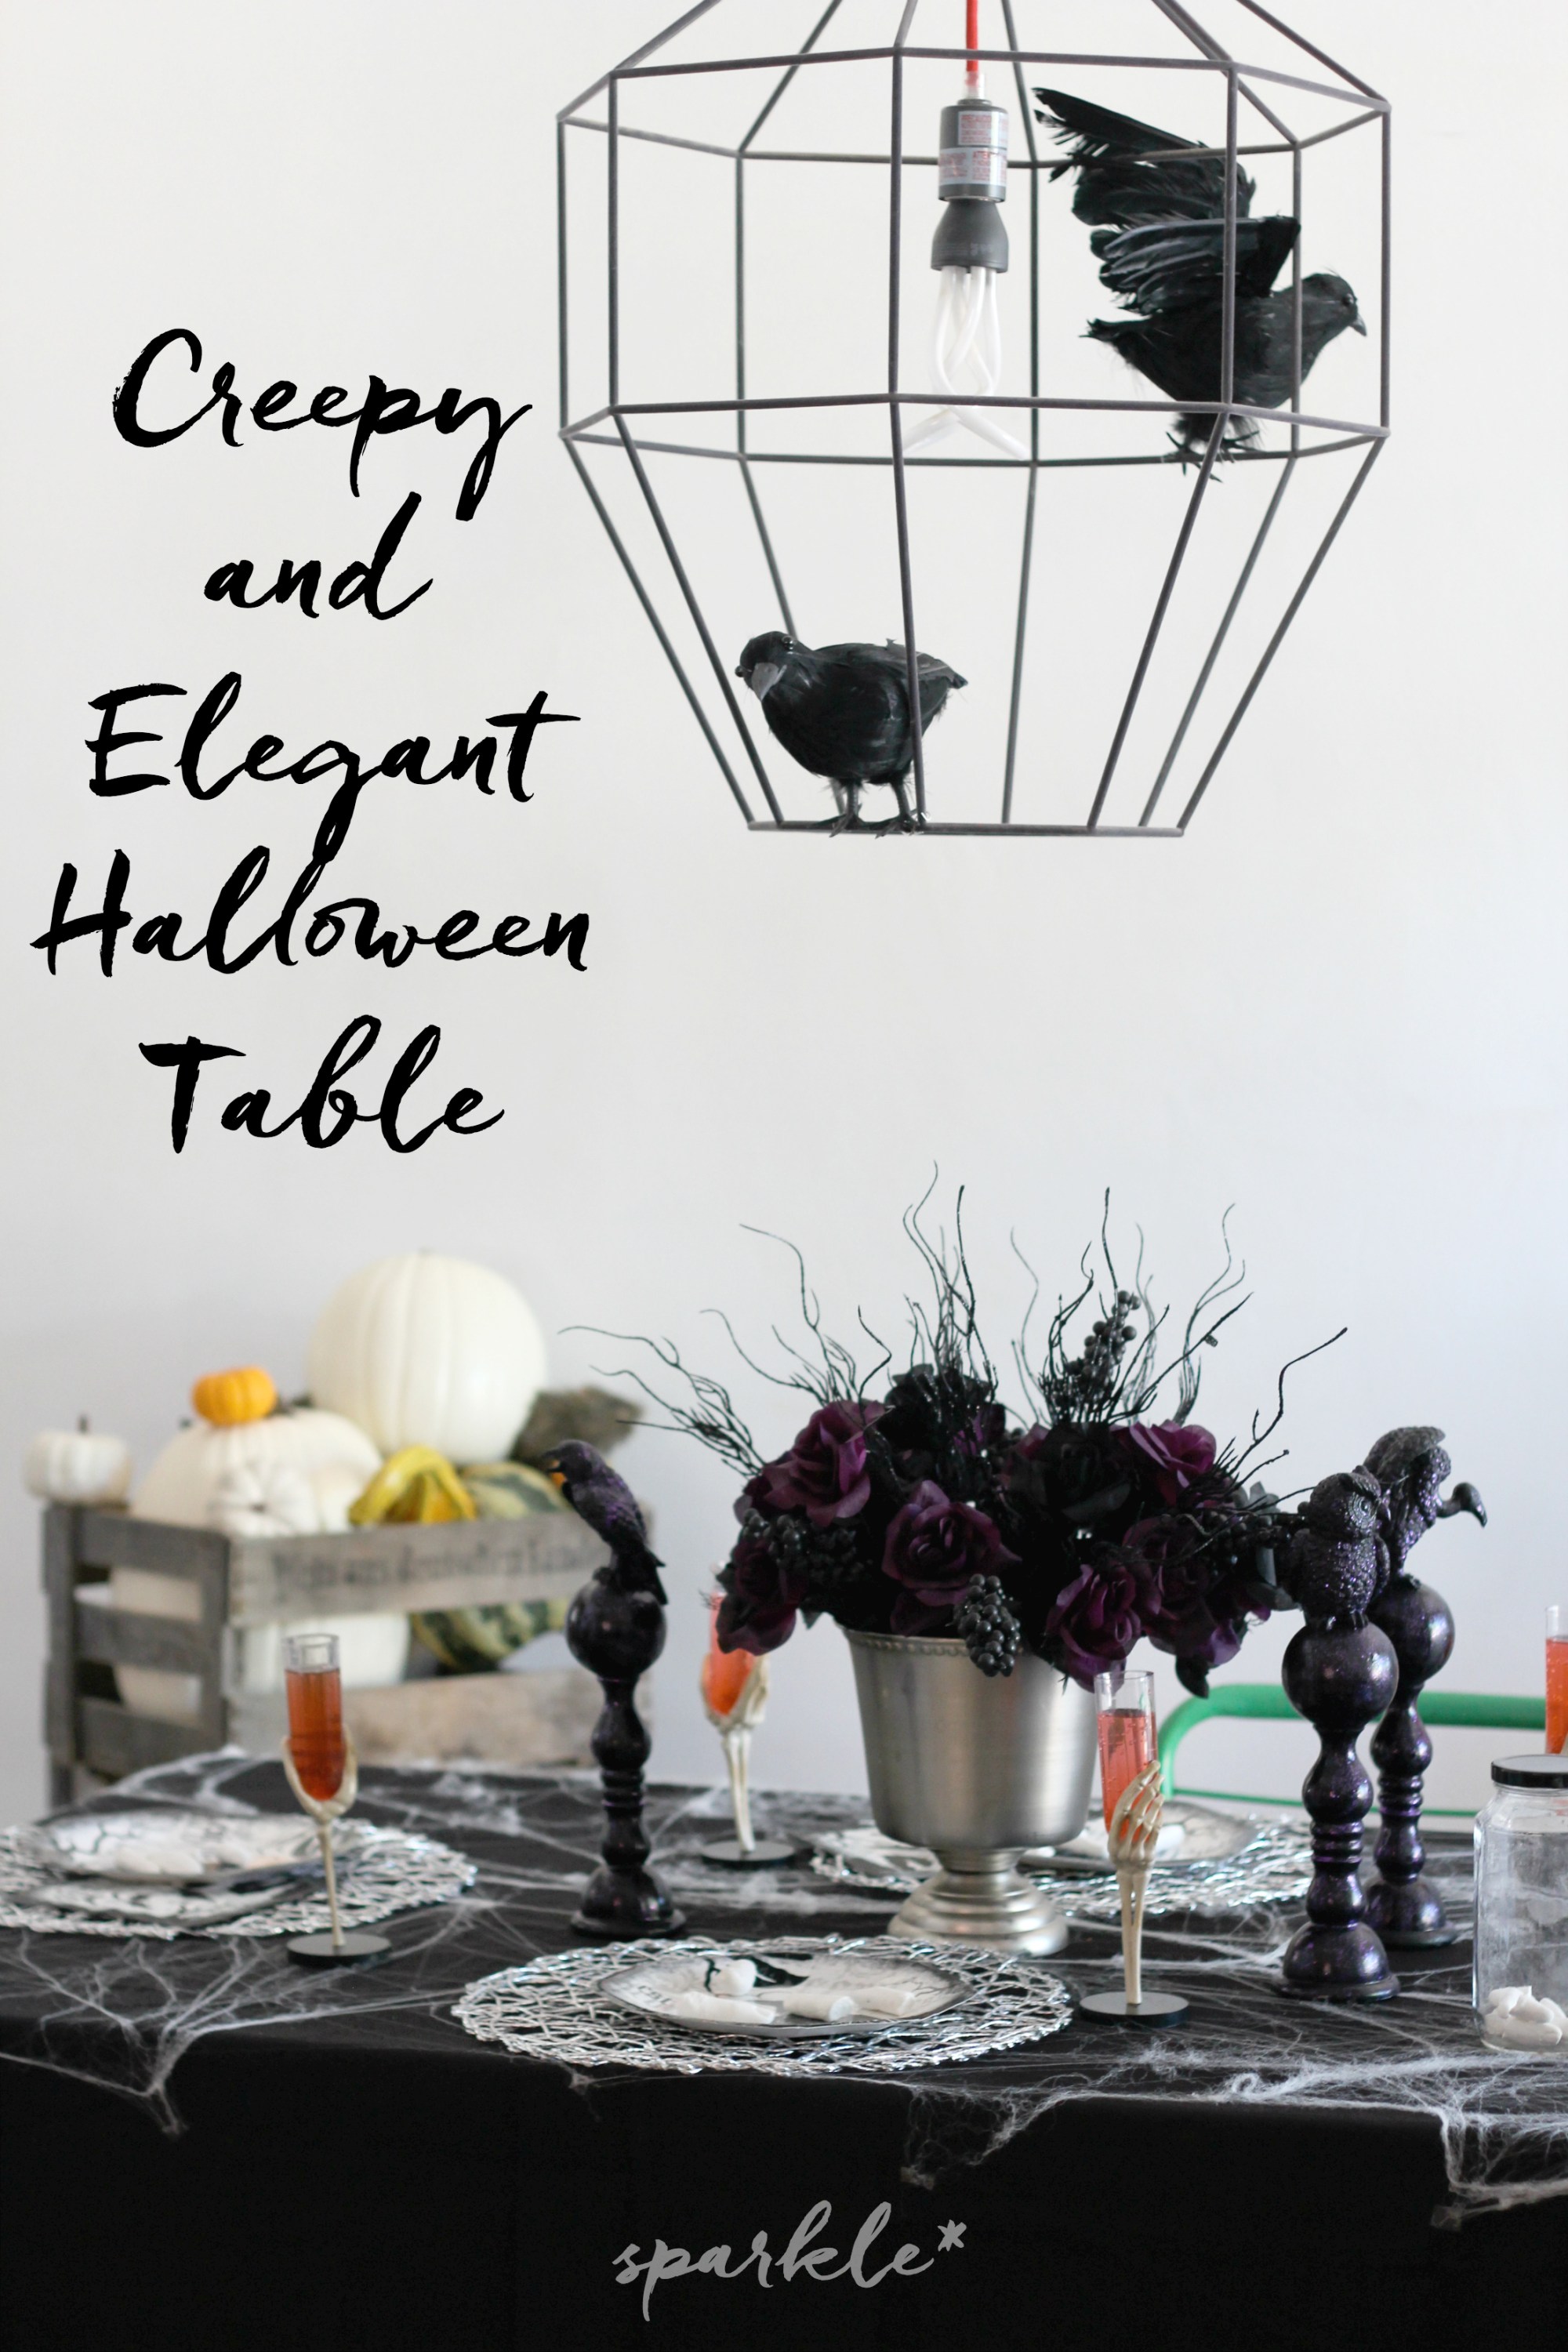 Creepy and elegant Halloween table that is in black with spider webs and dark flowers.